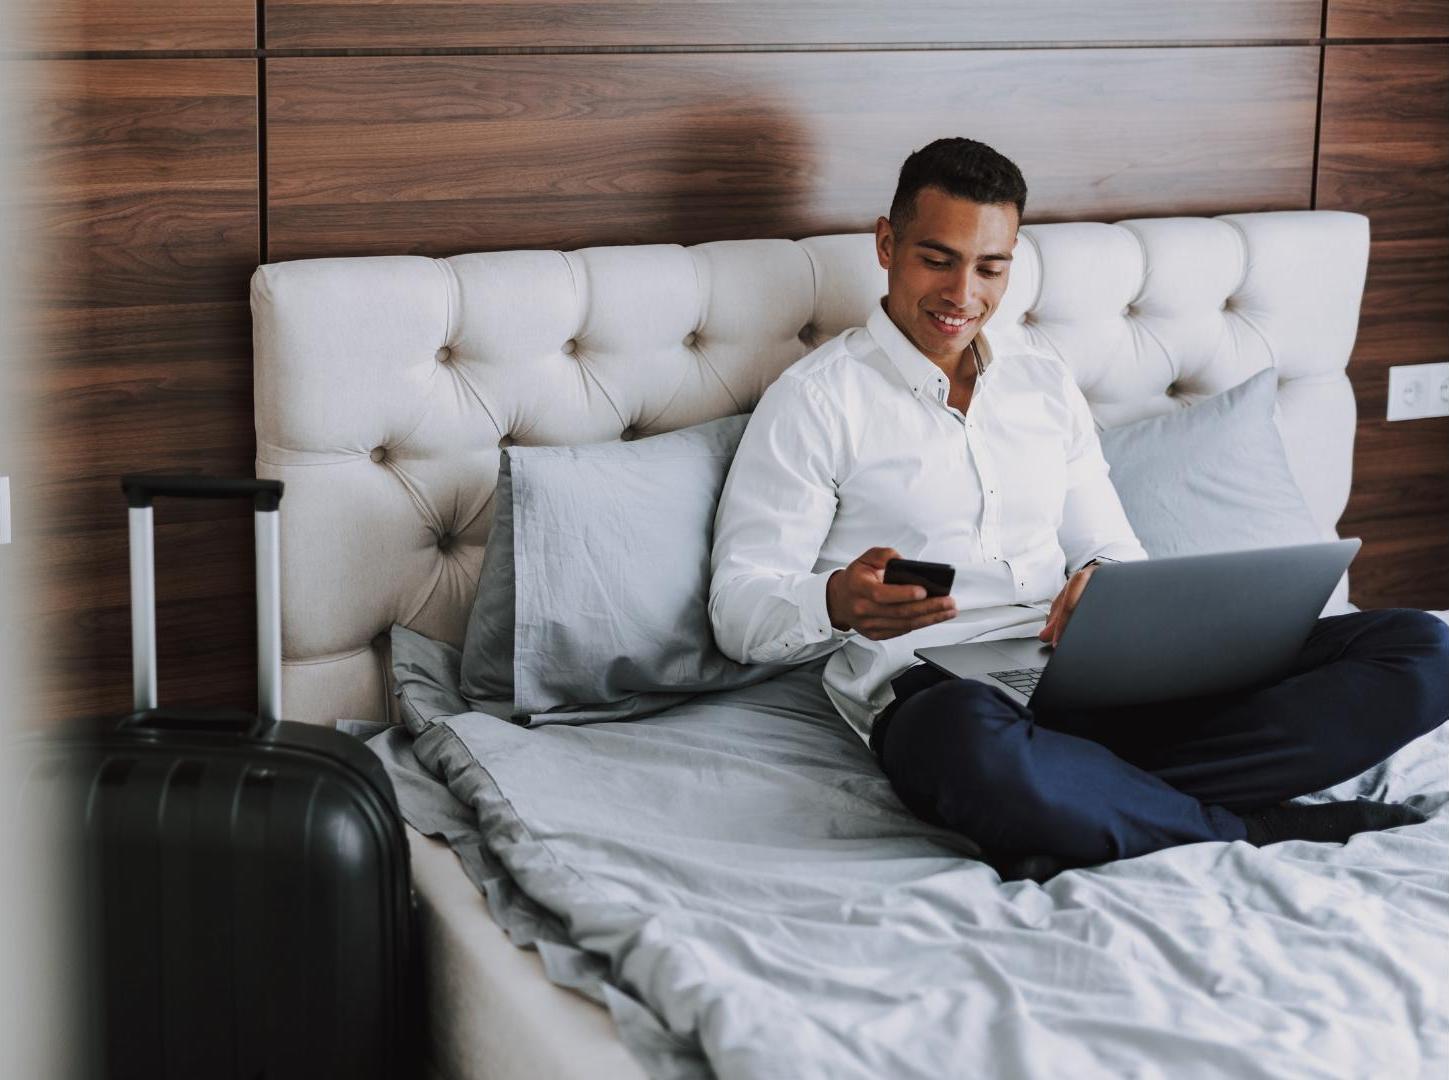 Latin-male-model-with-white-shirt-and-dark-blue-long-pants-smiling-to-his-phone-on-the-hotel-bad-with-macbook-on-his-two-legs-and-luggage-next-to-it